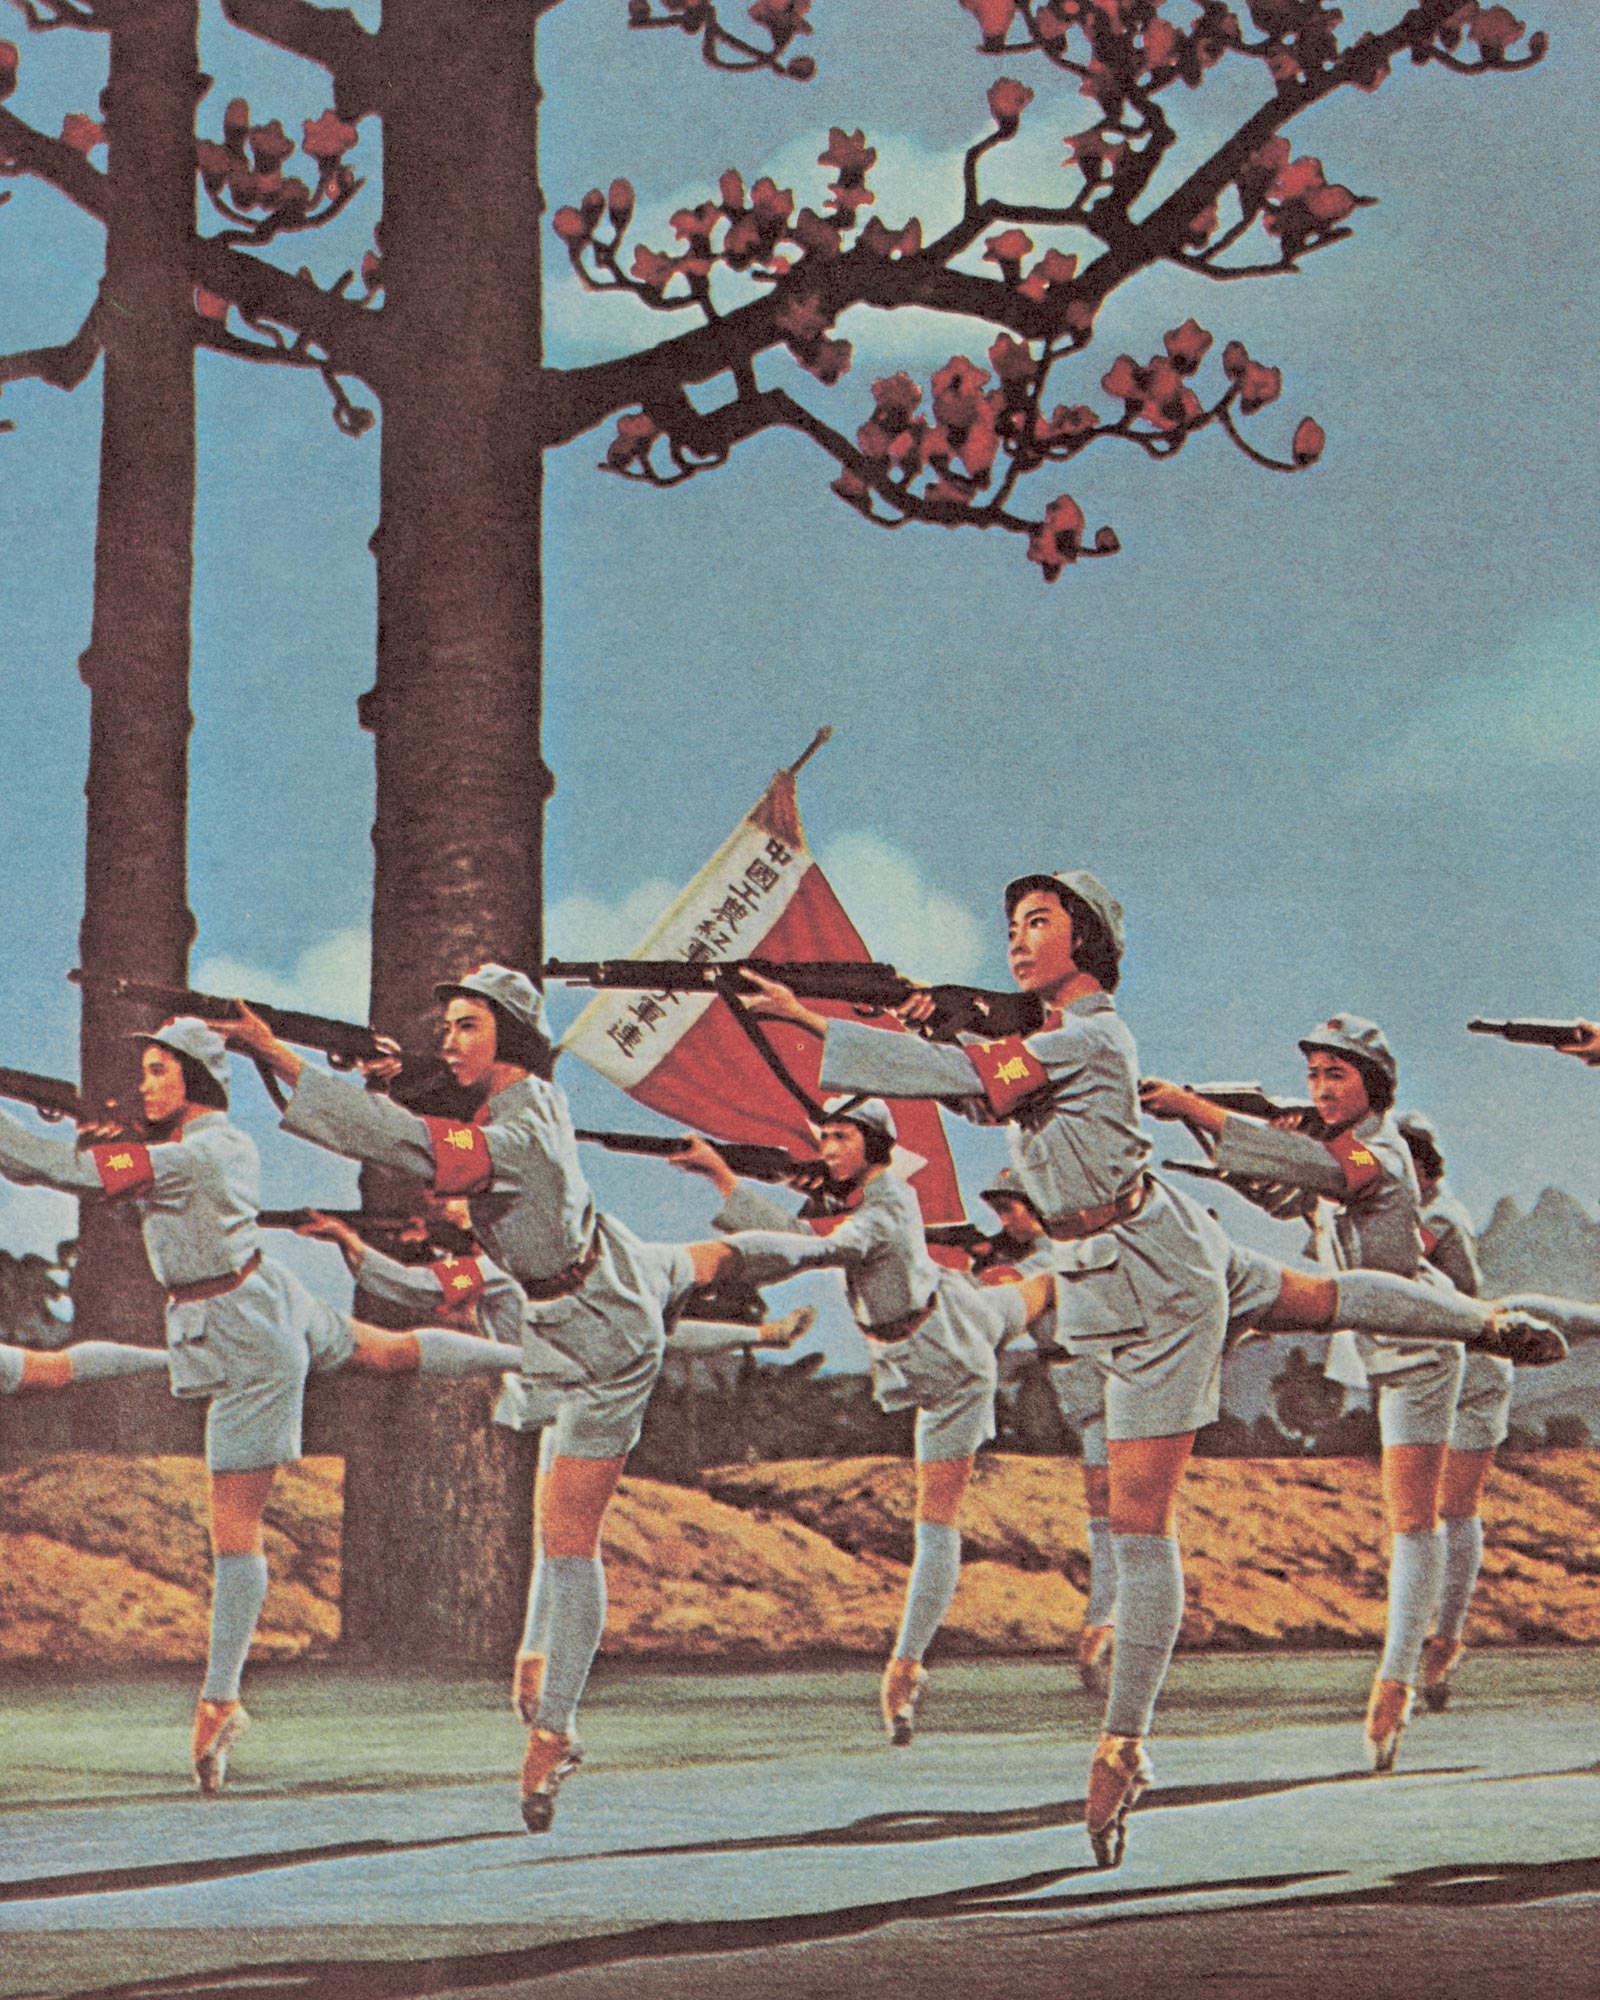 A detail shot of a nineteen seventy one Chinese poster for Revolutionary Contemporary Ballet’s “The Red Detachment of Women,” depicting a group of women en pointe with guns pointed ahead of them. The accompanying text announced that “In order to liberate the tens of thousands of people who are suffering, brave, vibrant, high-spirited women soldiers with guns in their hands train hard to develop skills to kill the enemy.”